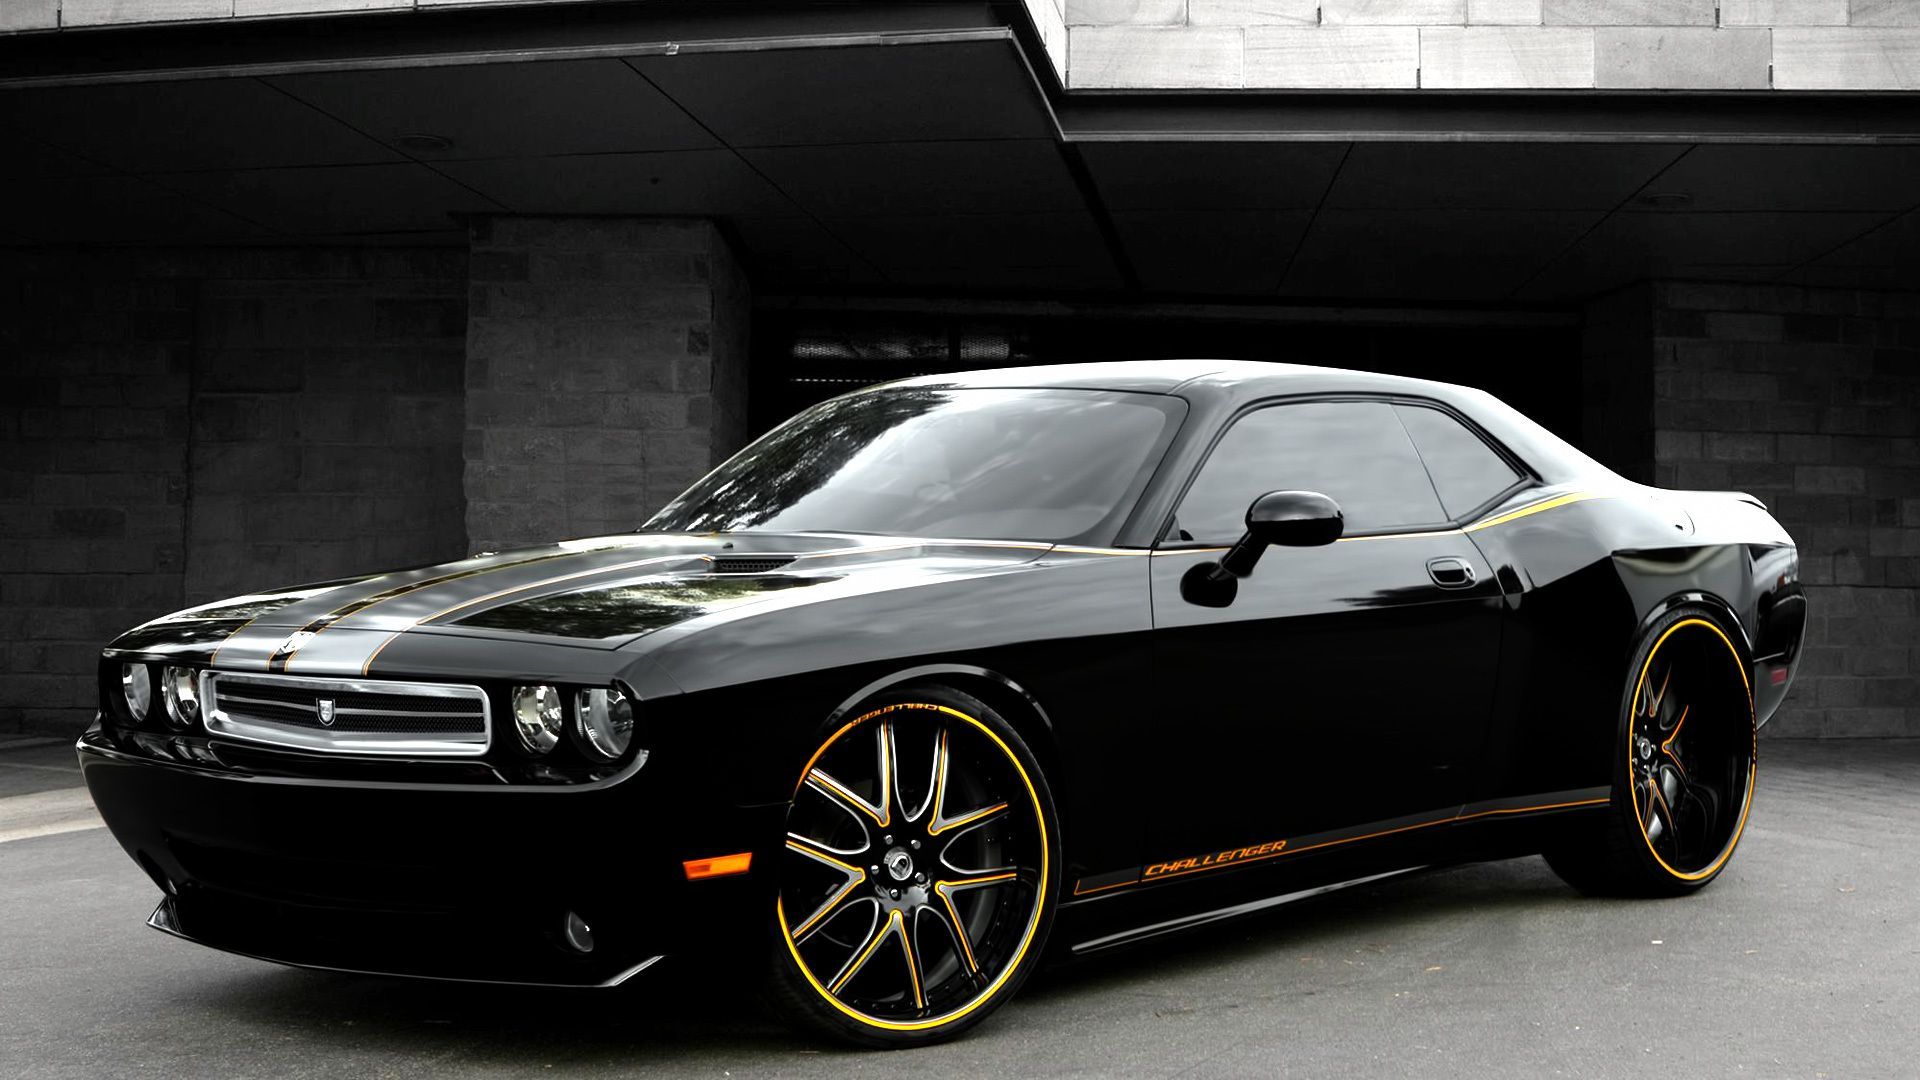 Dodge Challenger Tuning Free Car Wallpapers Hd Dodge Challenger ...